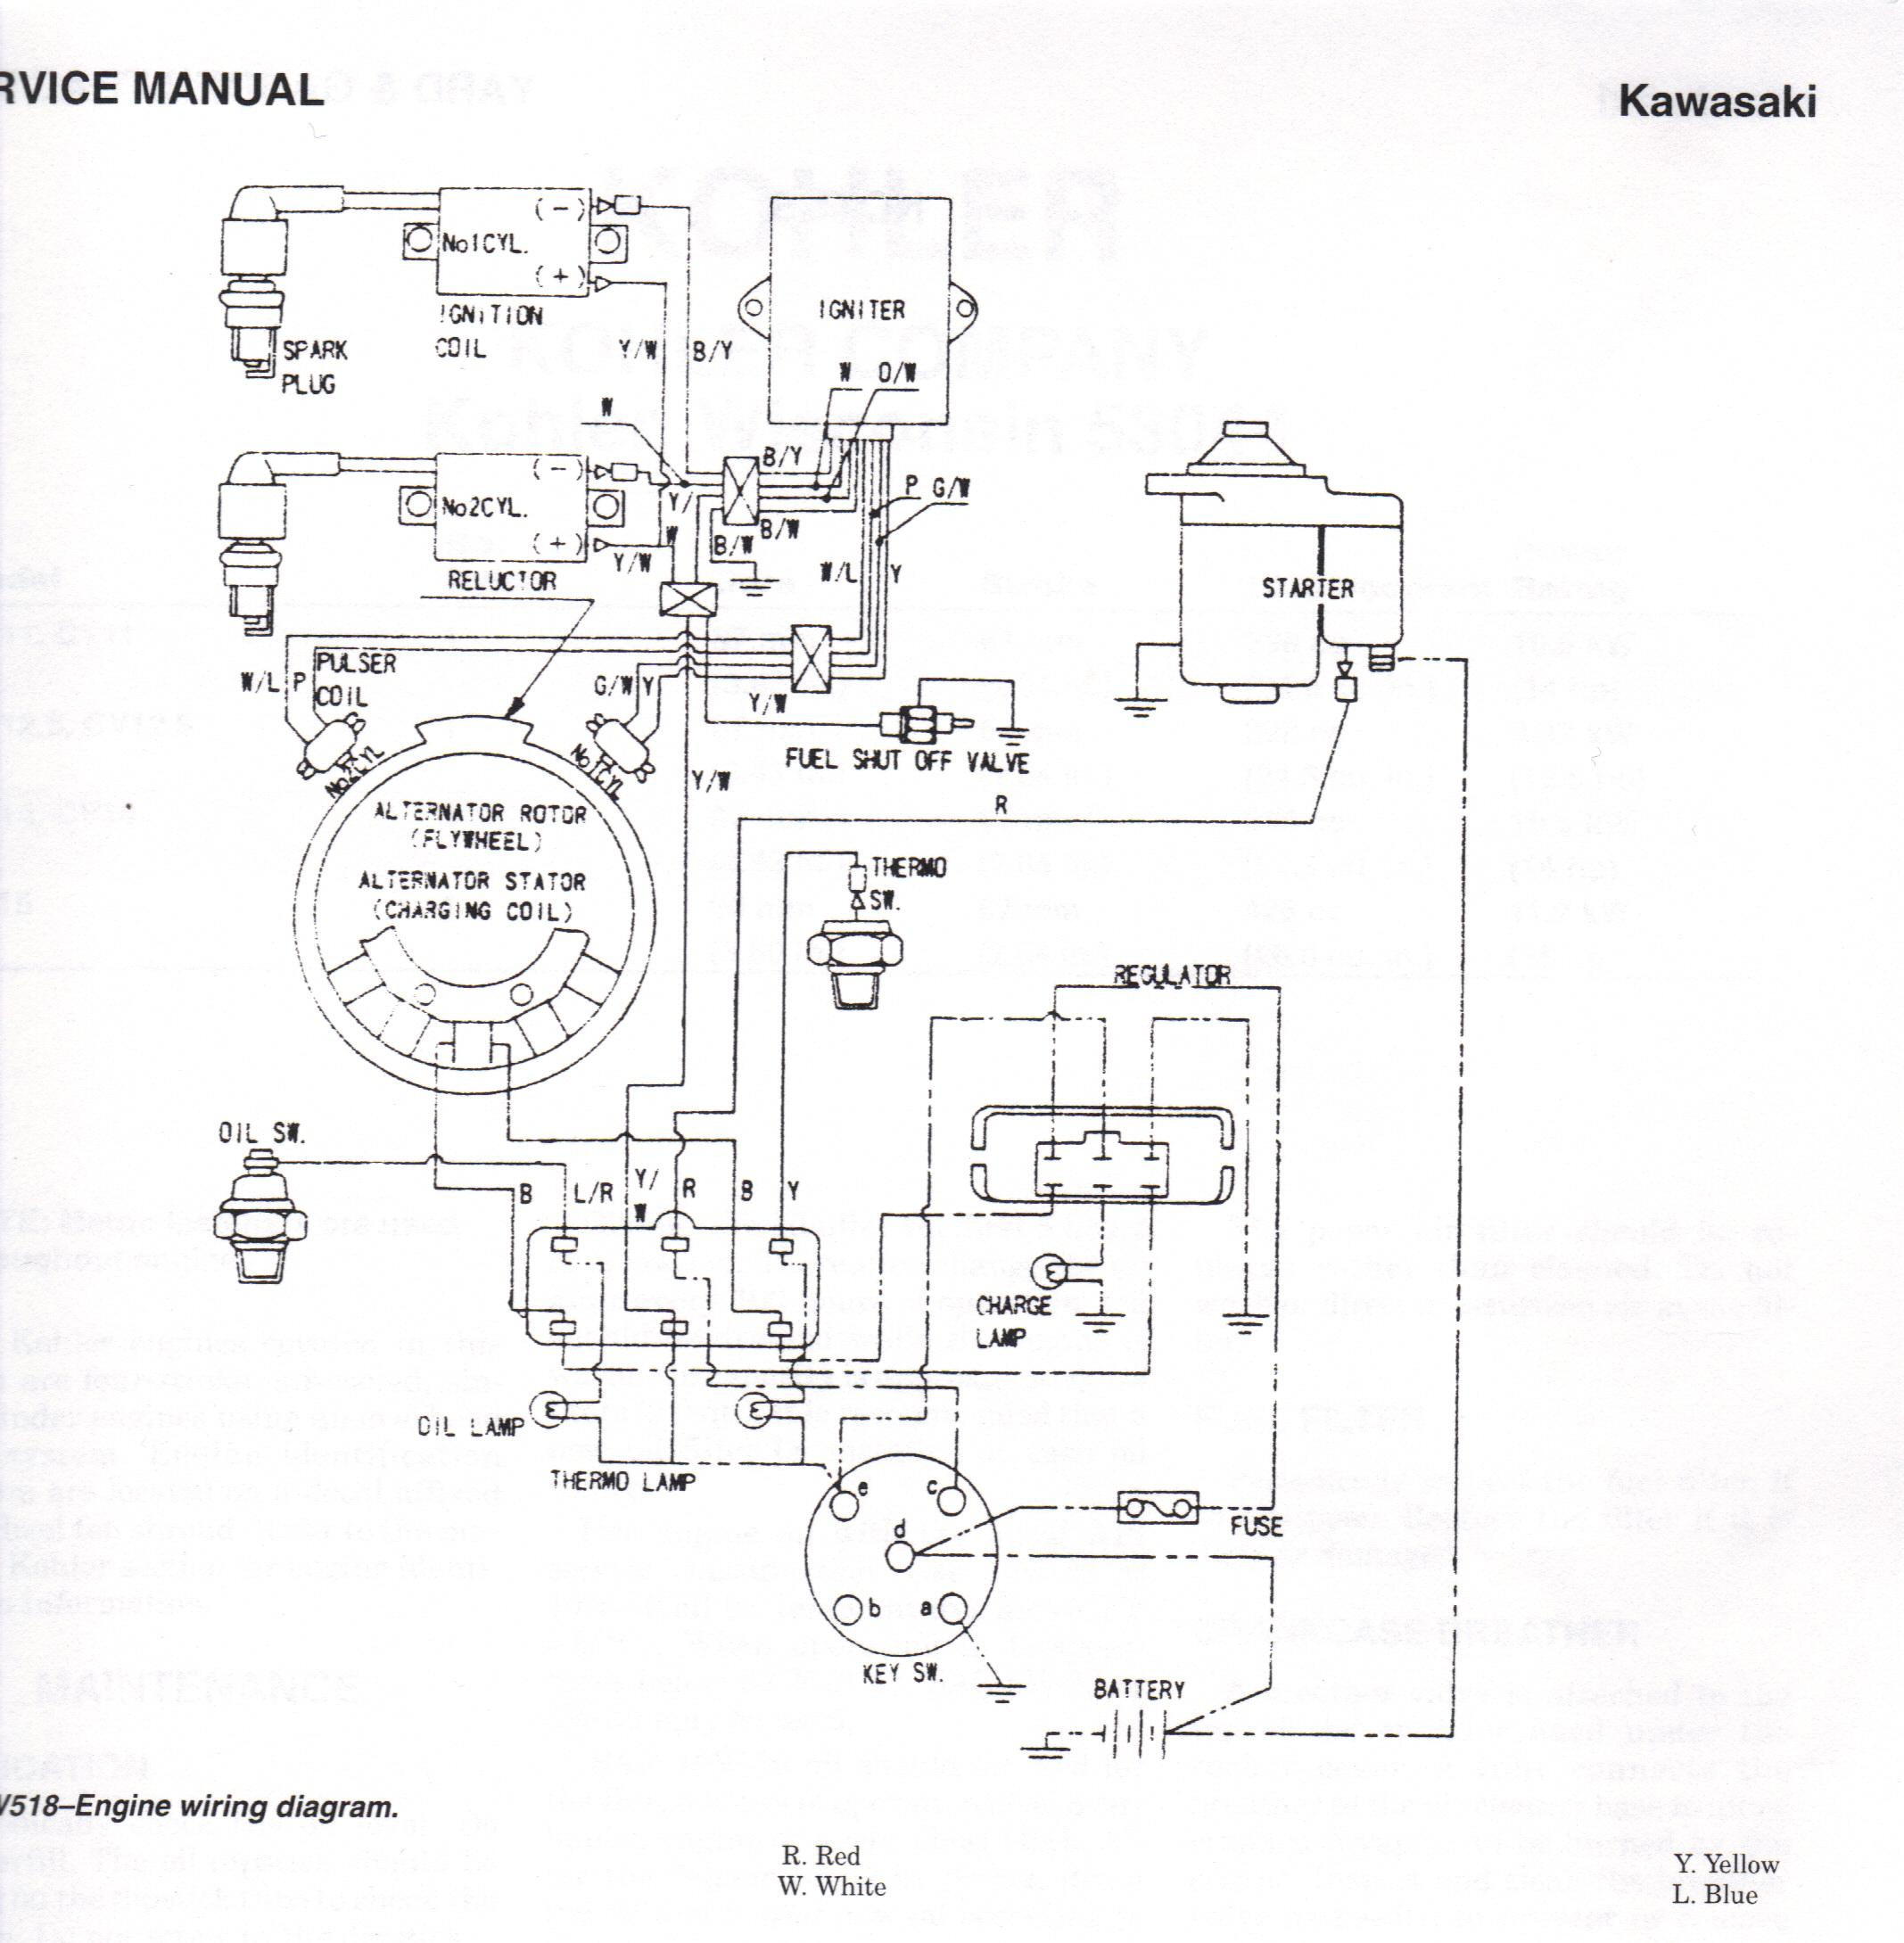 Where is the Voltage Regulator Located On A Jd Gx345 Tractor Need to Find Info On Electrical Schematic for Deere 345 Lawn … Of Where is the Voltage Regulator Located On A Jd Gx345 Tractor